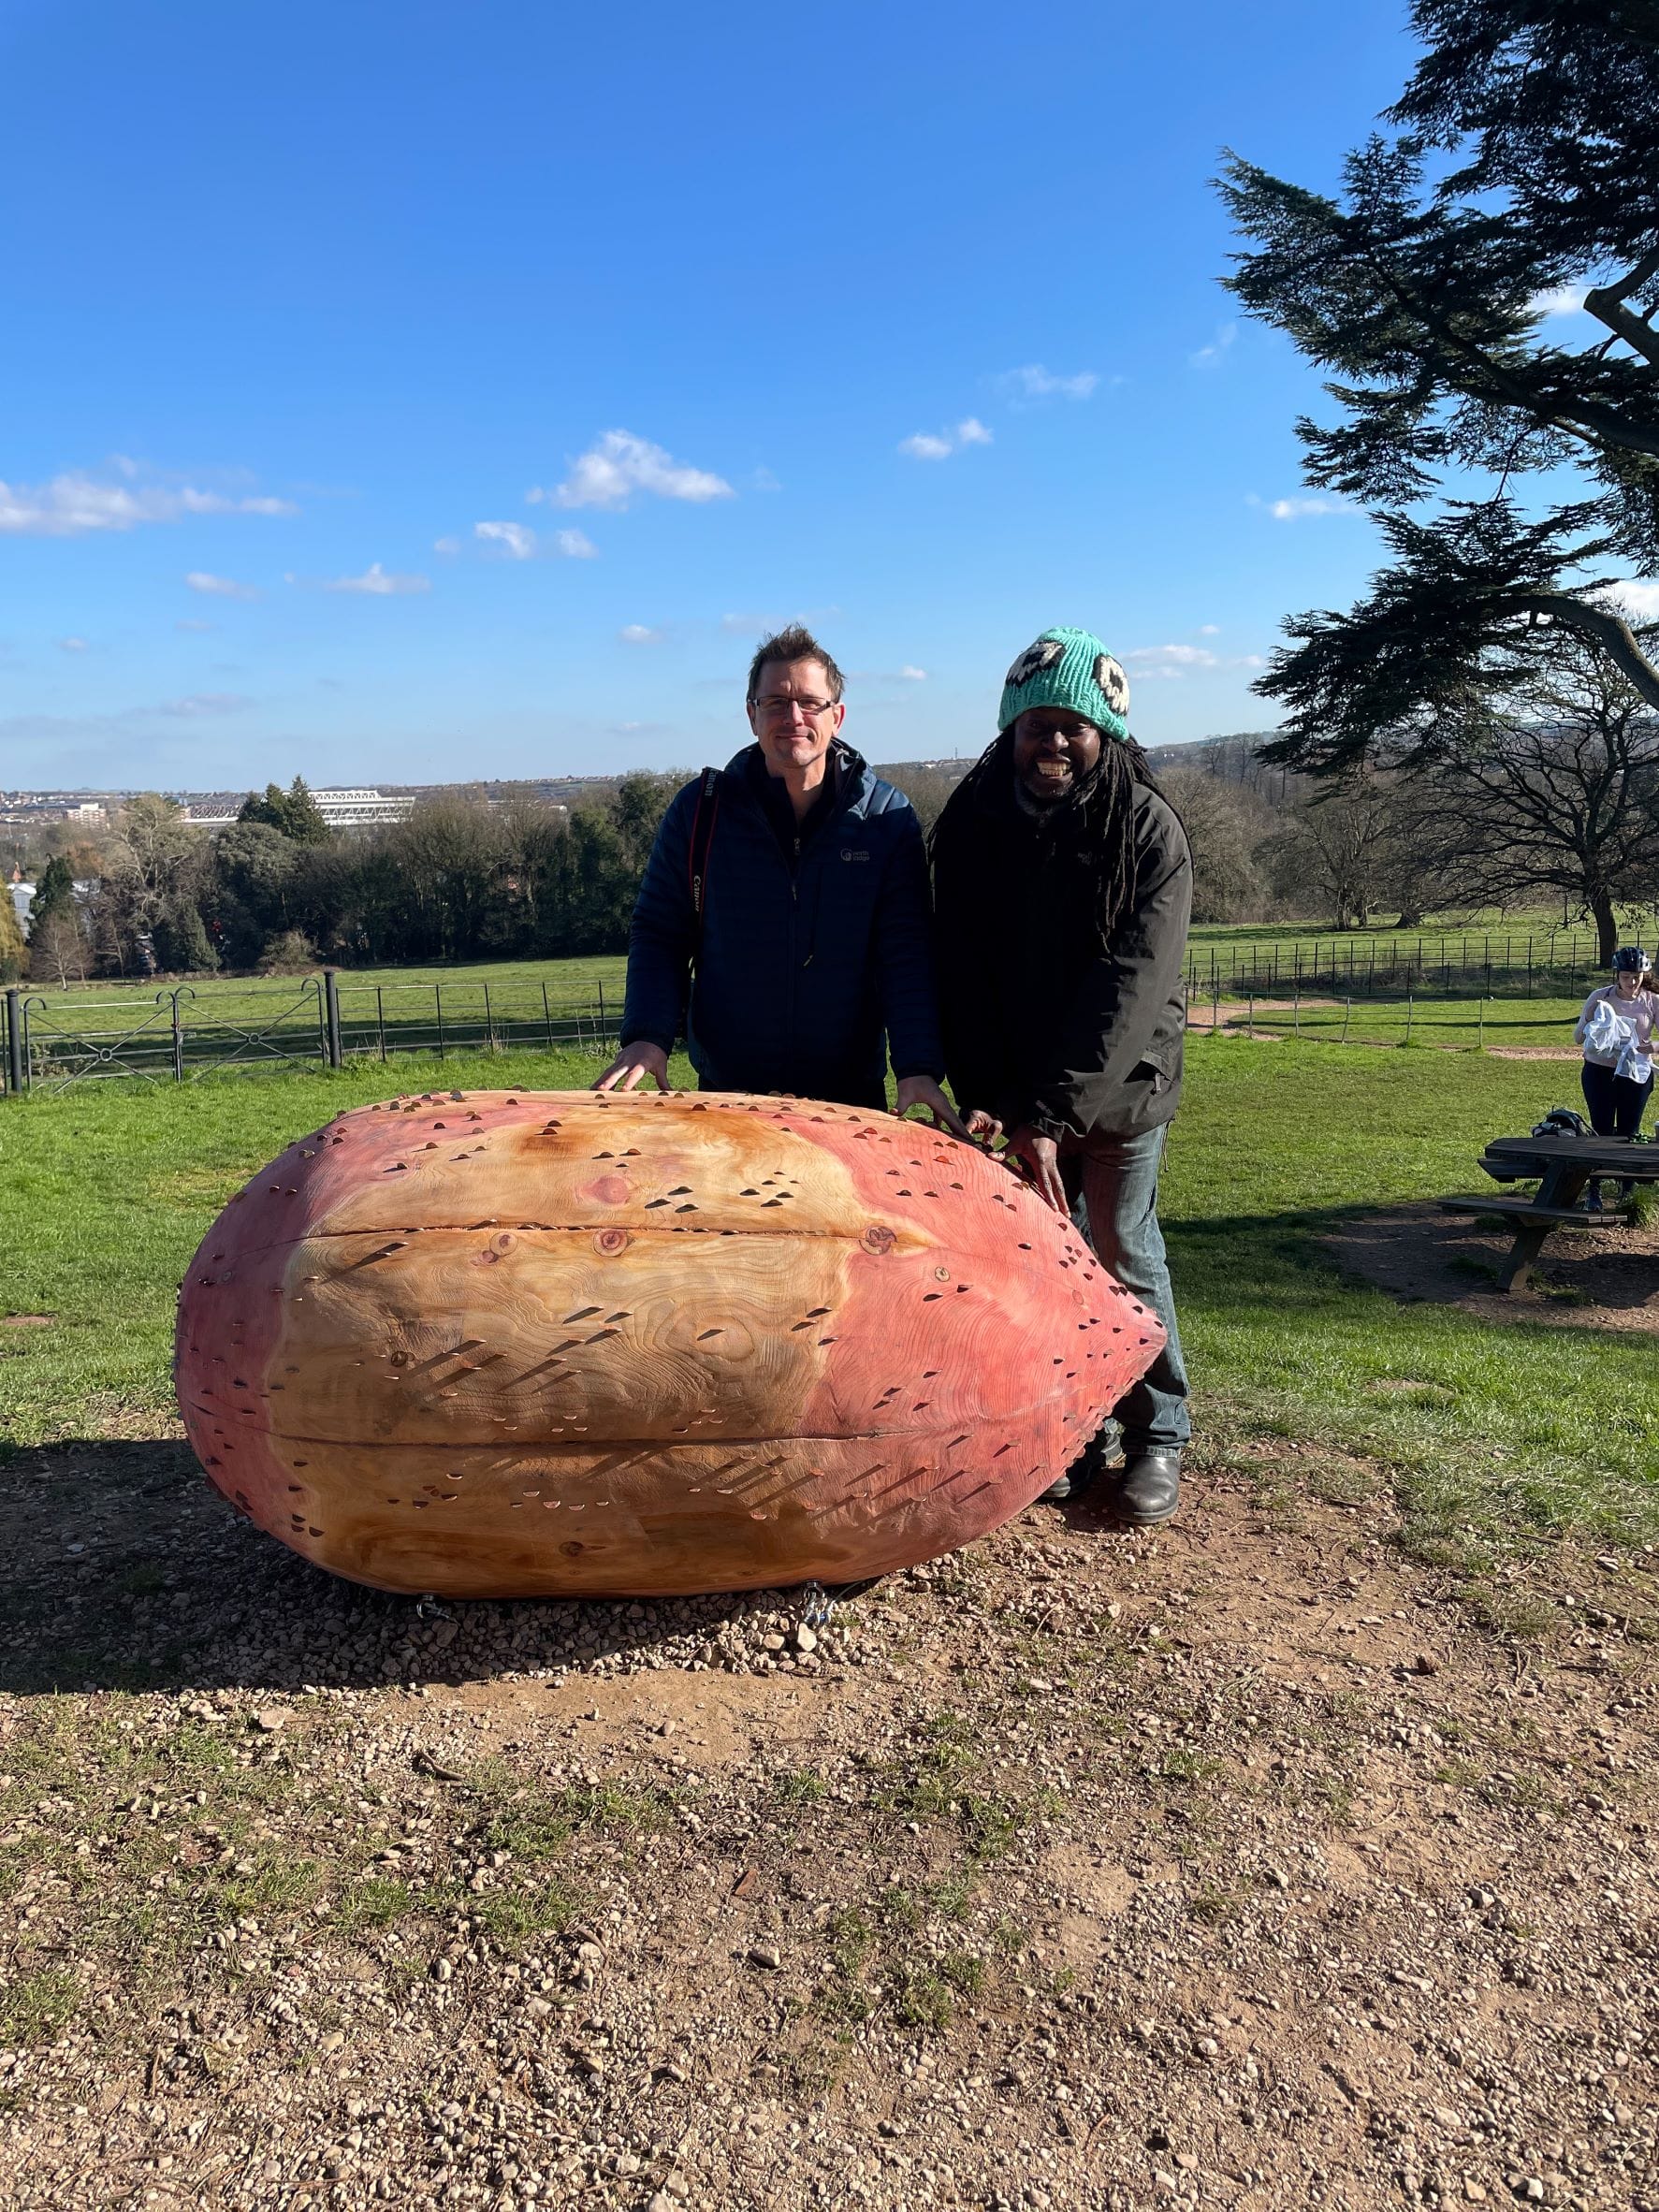 Two mnn are standing over a seed sculpture.  The man on the left is a white man, The man on the right is a black man wearing a green hat with eyes on it